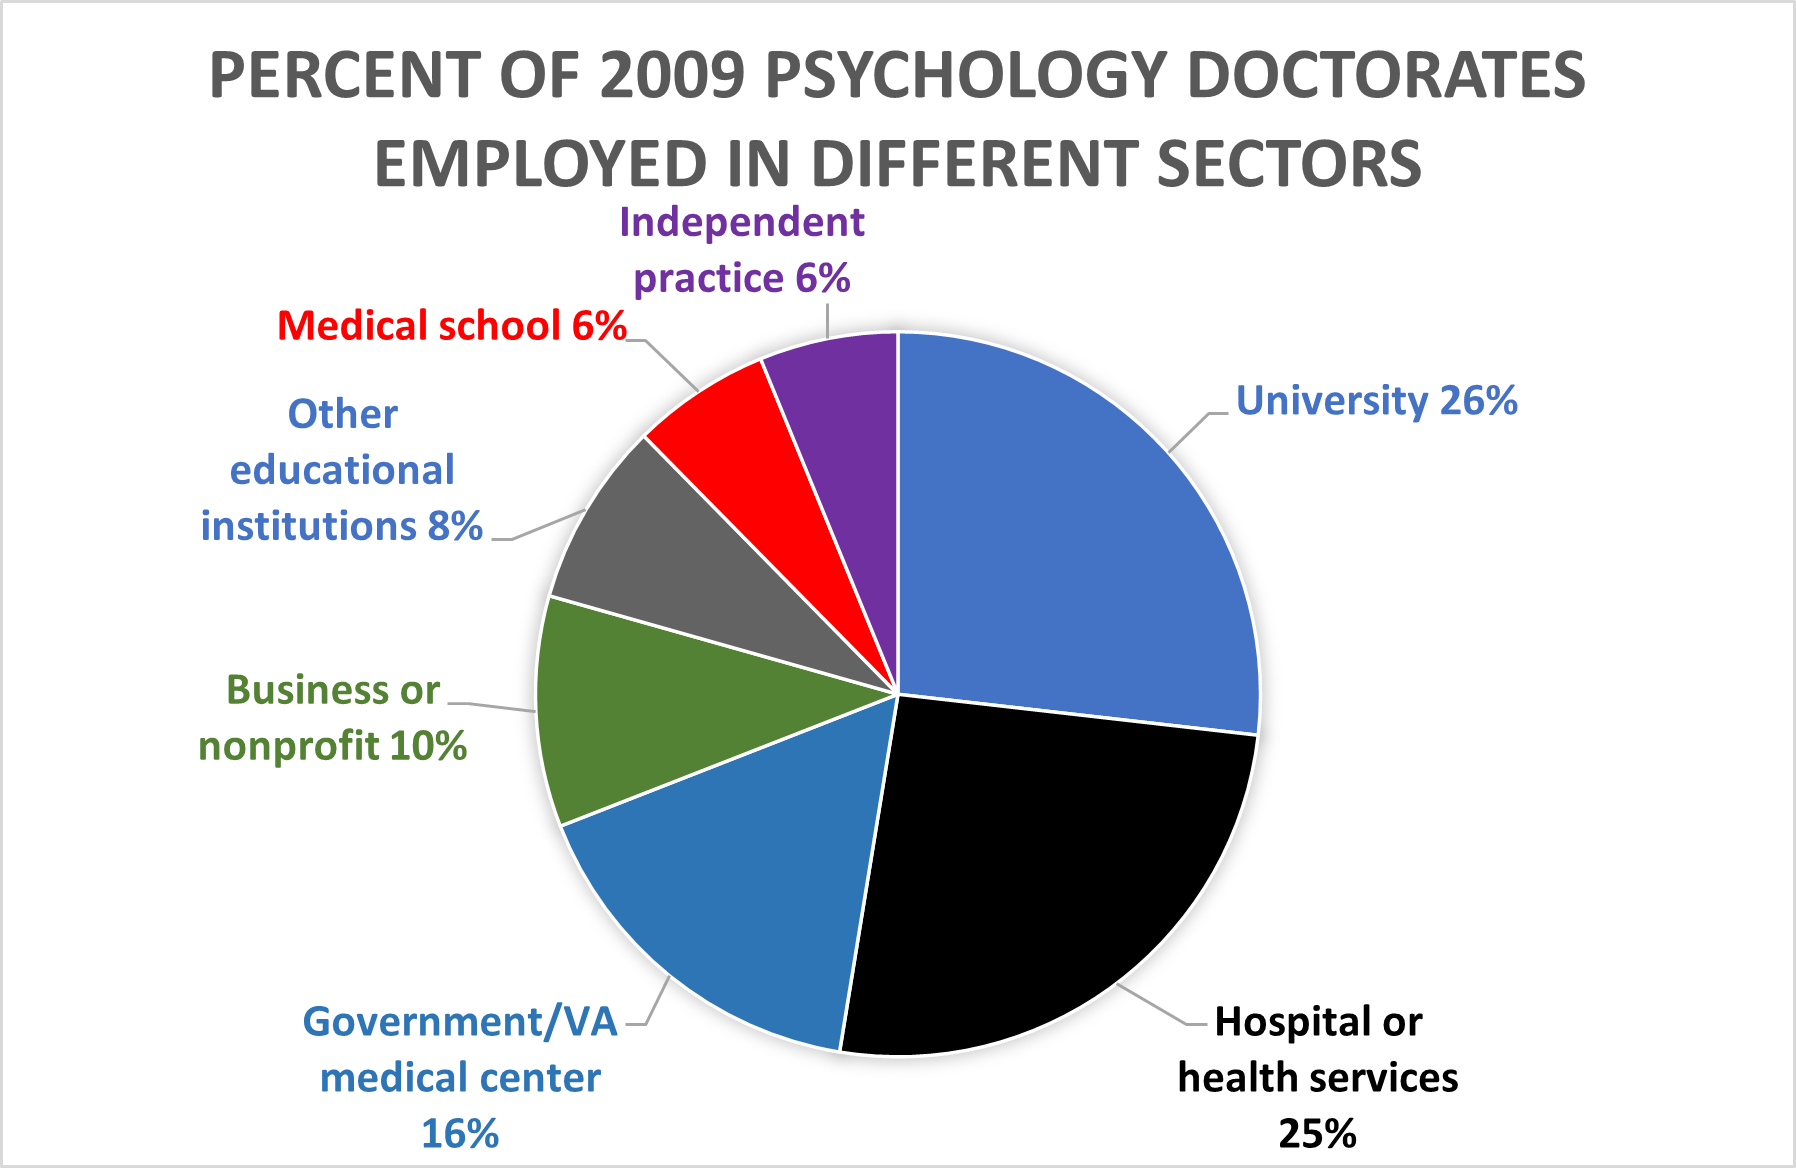 A pie chart showing the percentage of psychology doctorates employed in different sectors. Long description available.